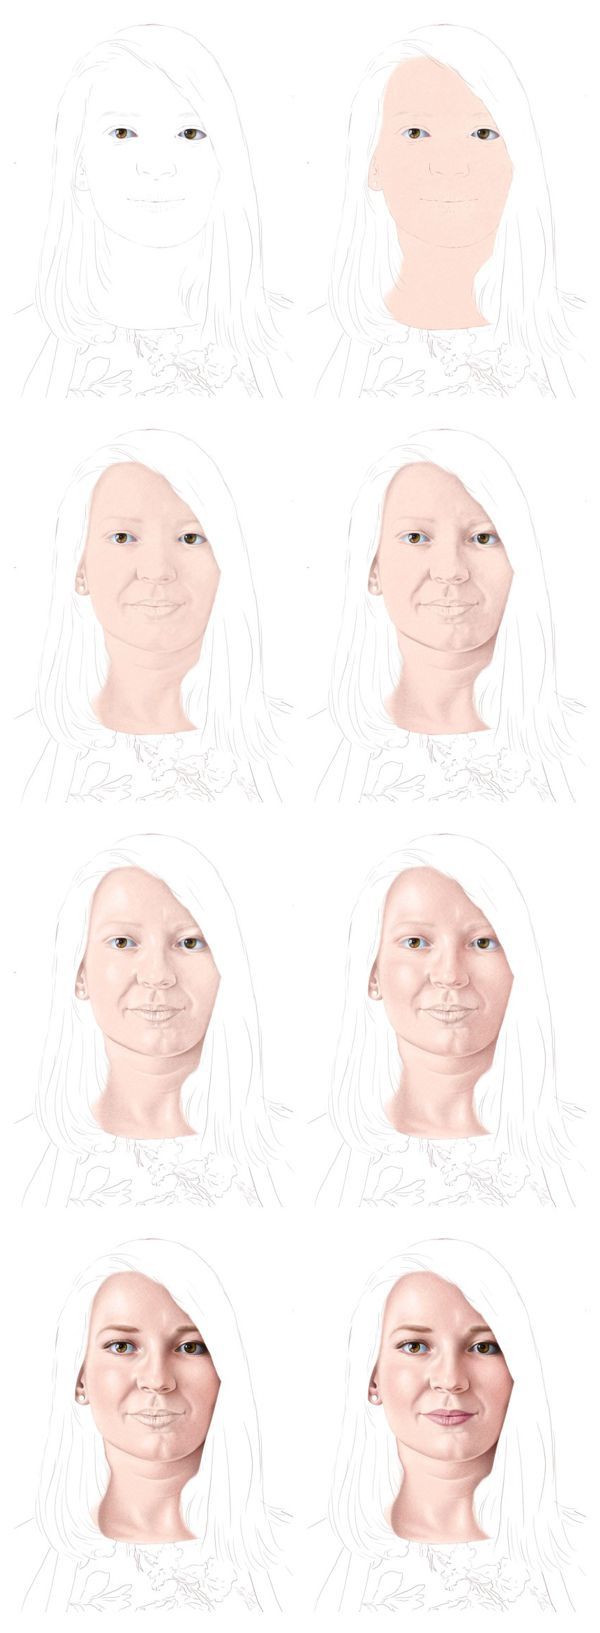 Color Pencil Portraits - How to Shade the Skin: Steps 1-8